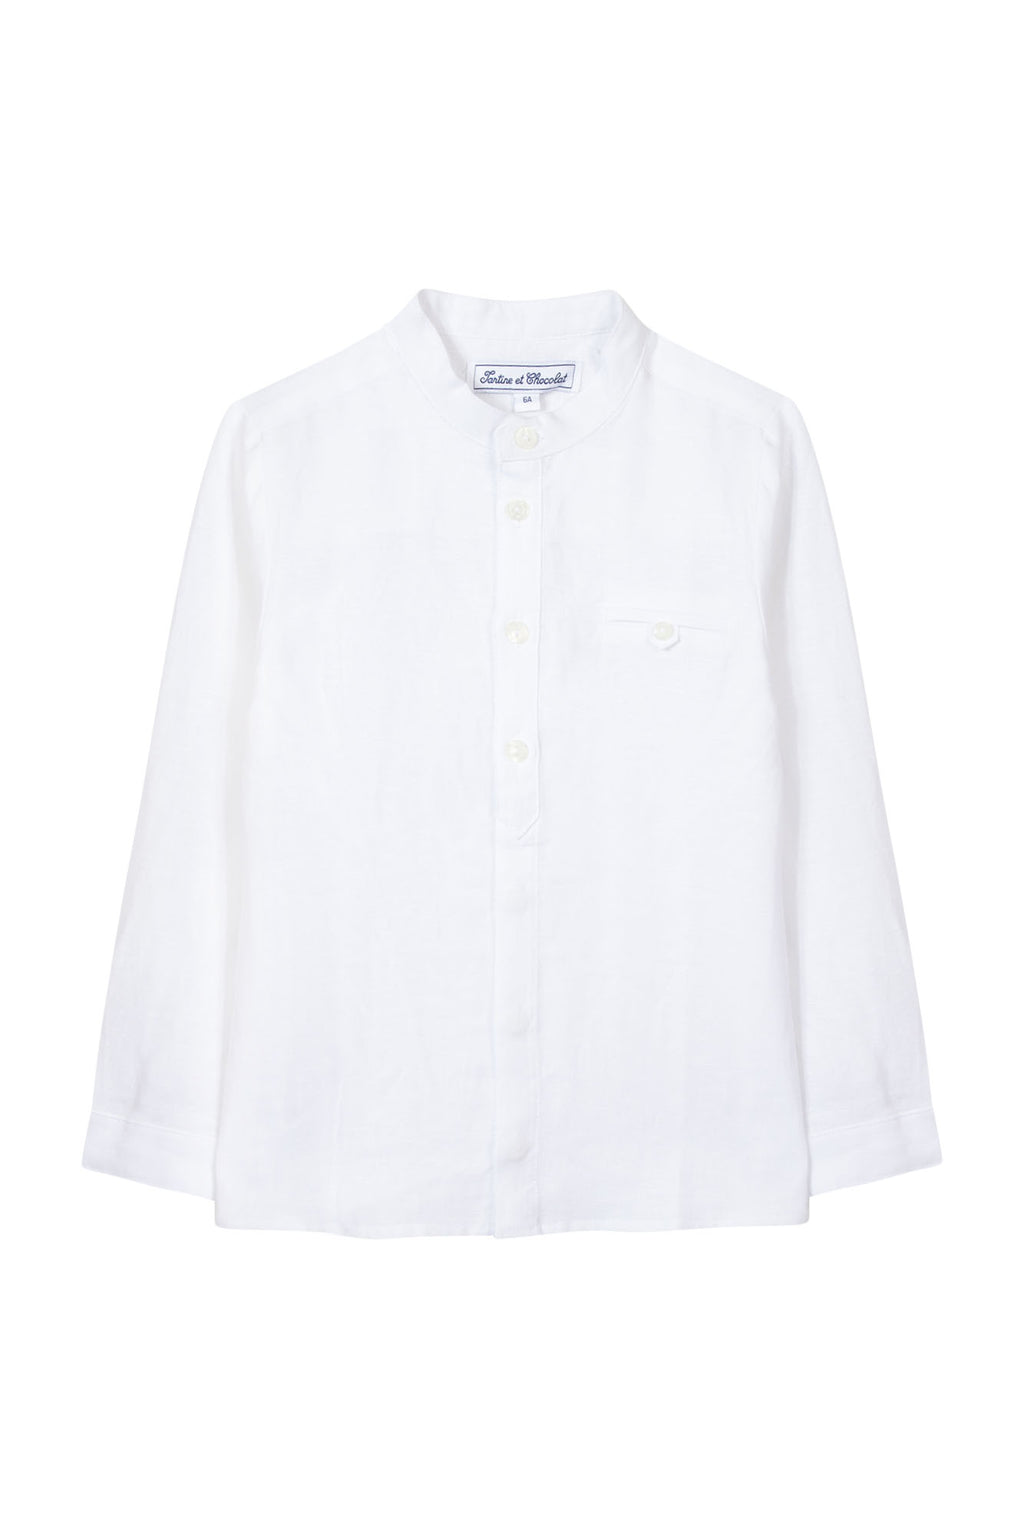 Chemise - Lin blanc manches longues